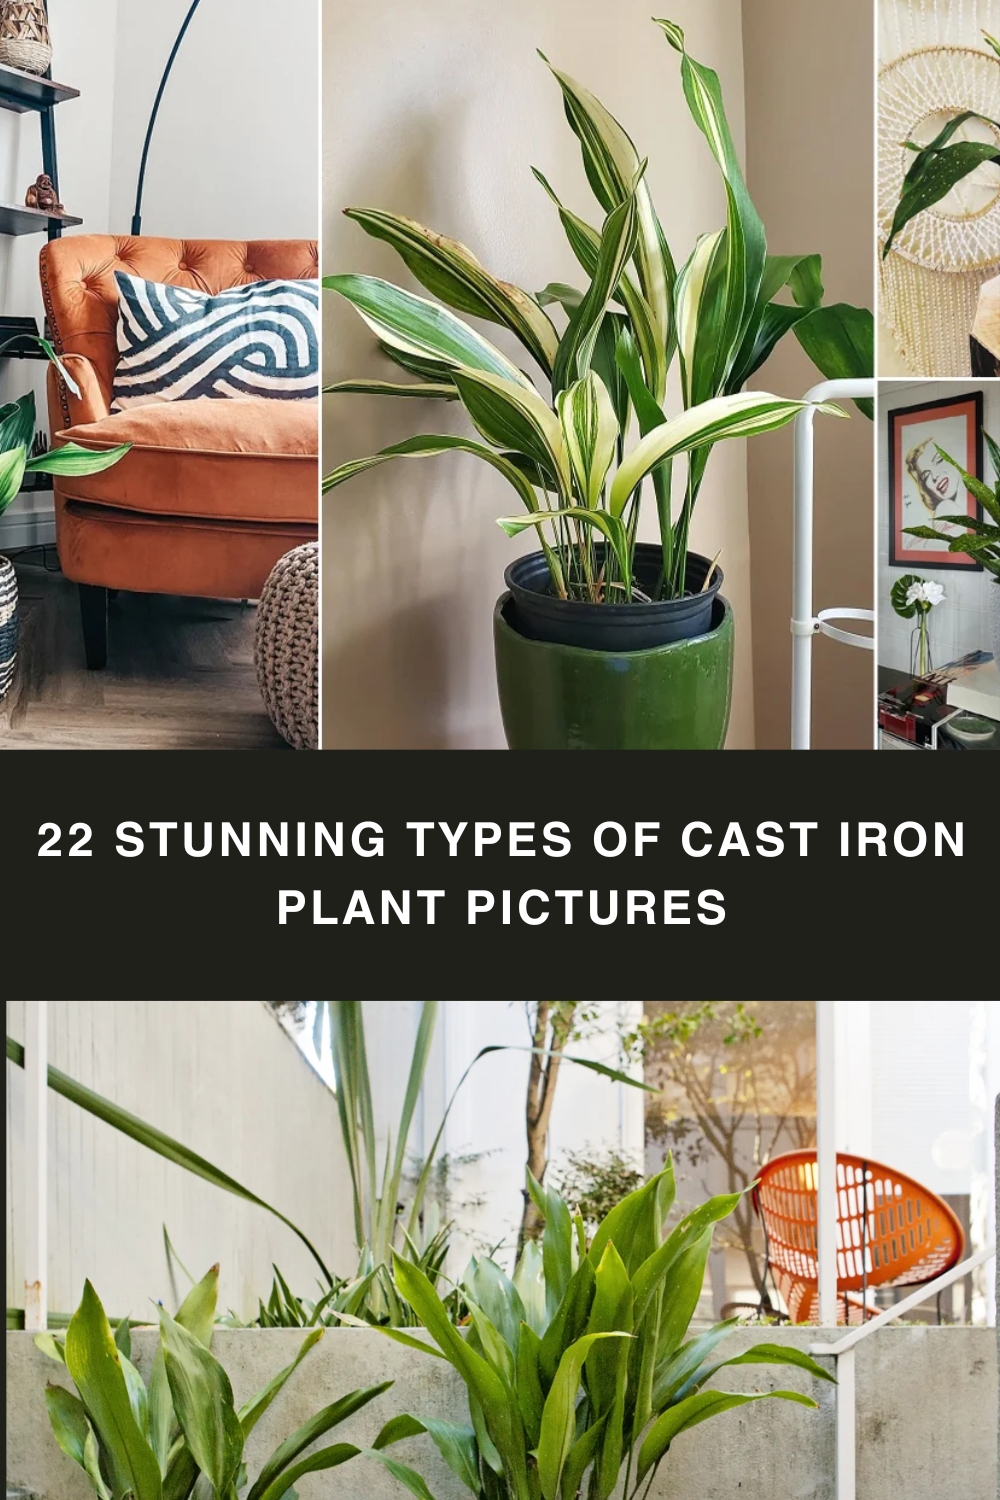 22 Stunning Types of Cast Iron Plant Pictures pin